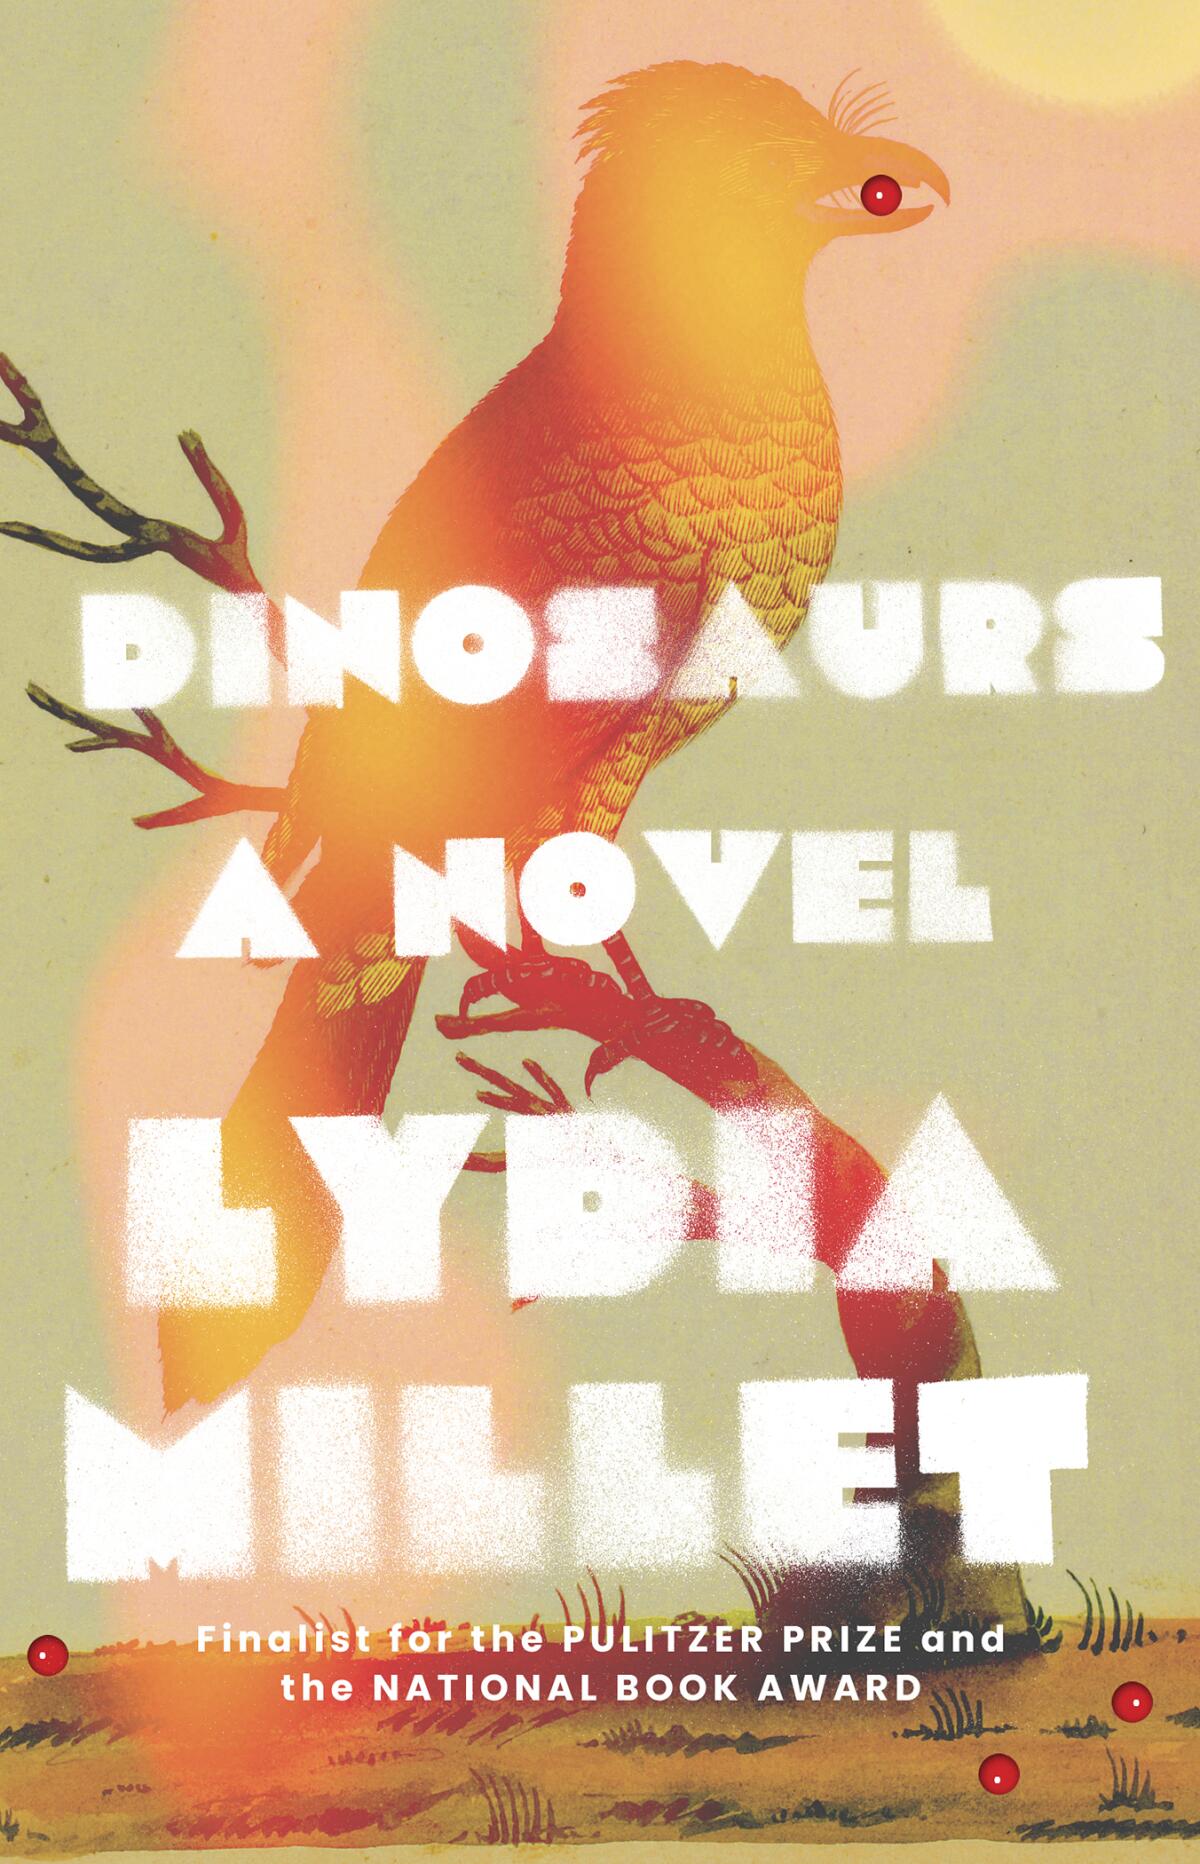 This cover image released by W. W. Norton shows "Dinosaurs," by Lydia Millet. (W.W. Norton via AP)